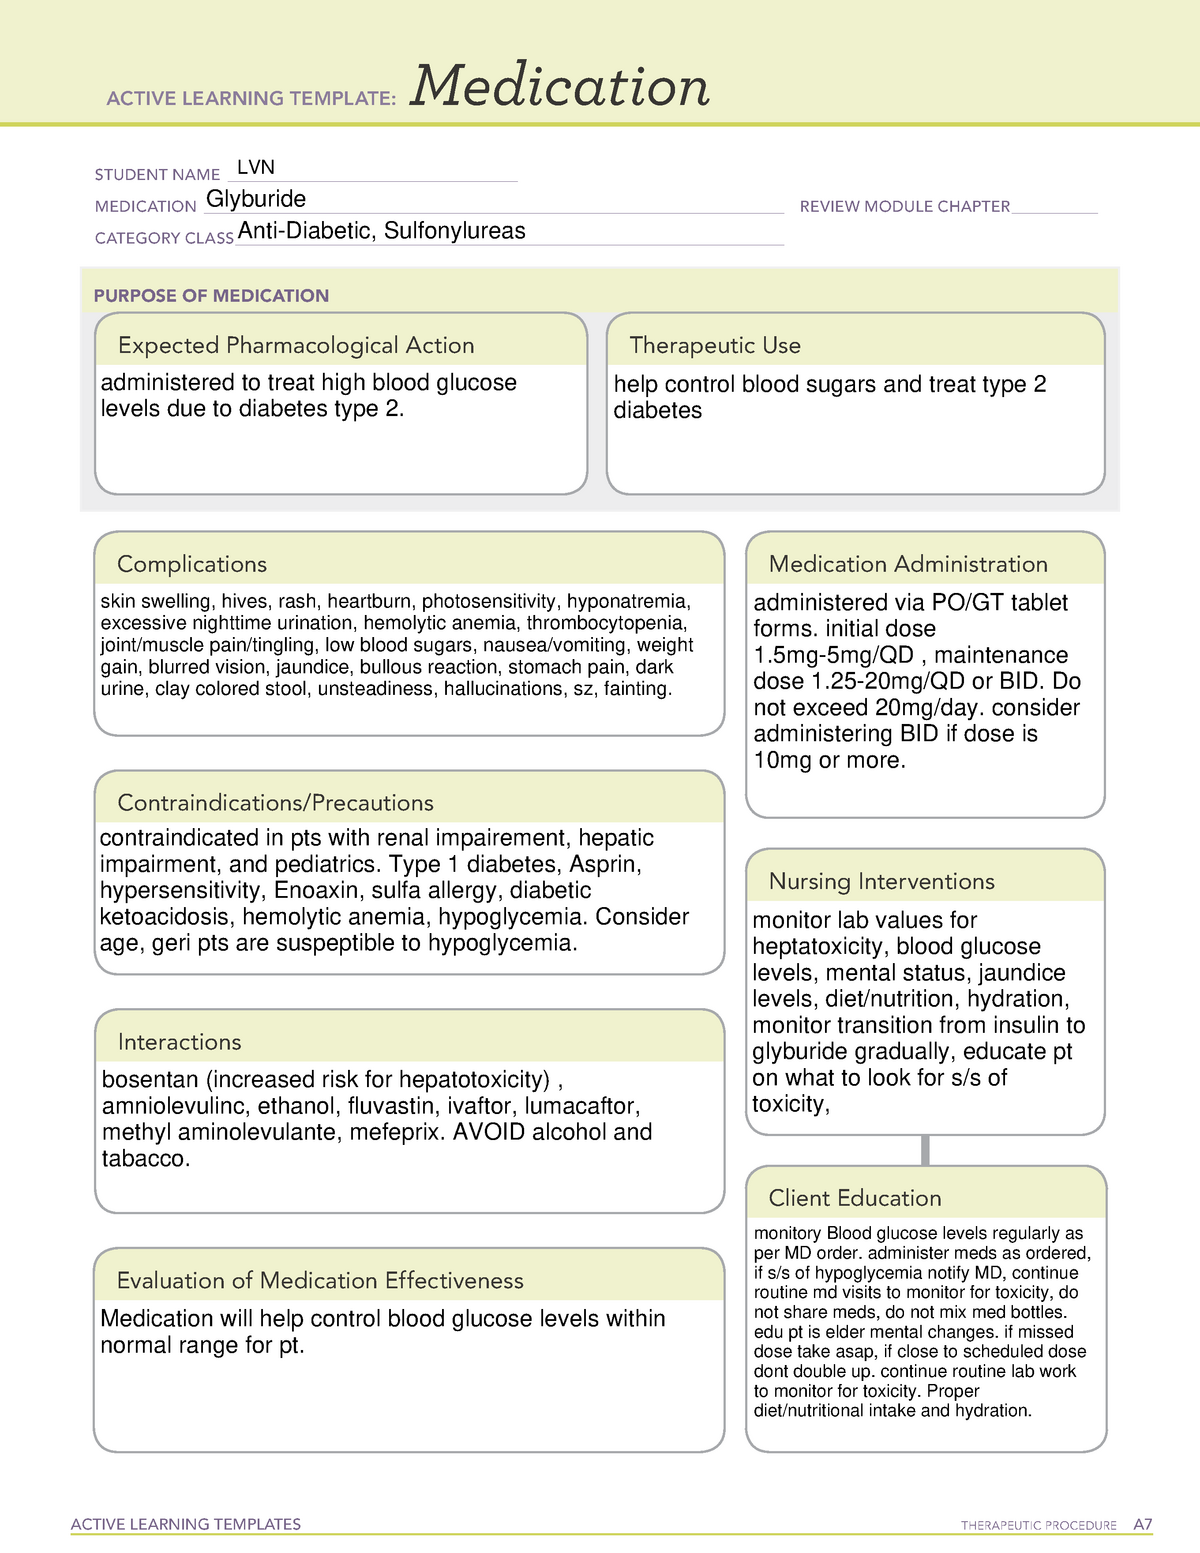 glyburide-template-active-learning-templates-therapeutic-procedure-a